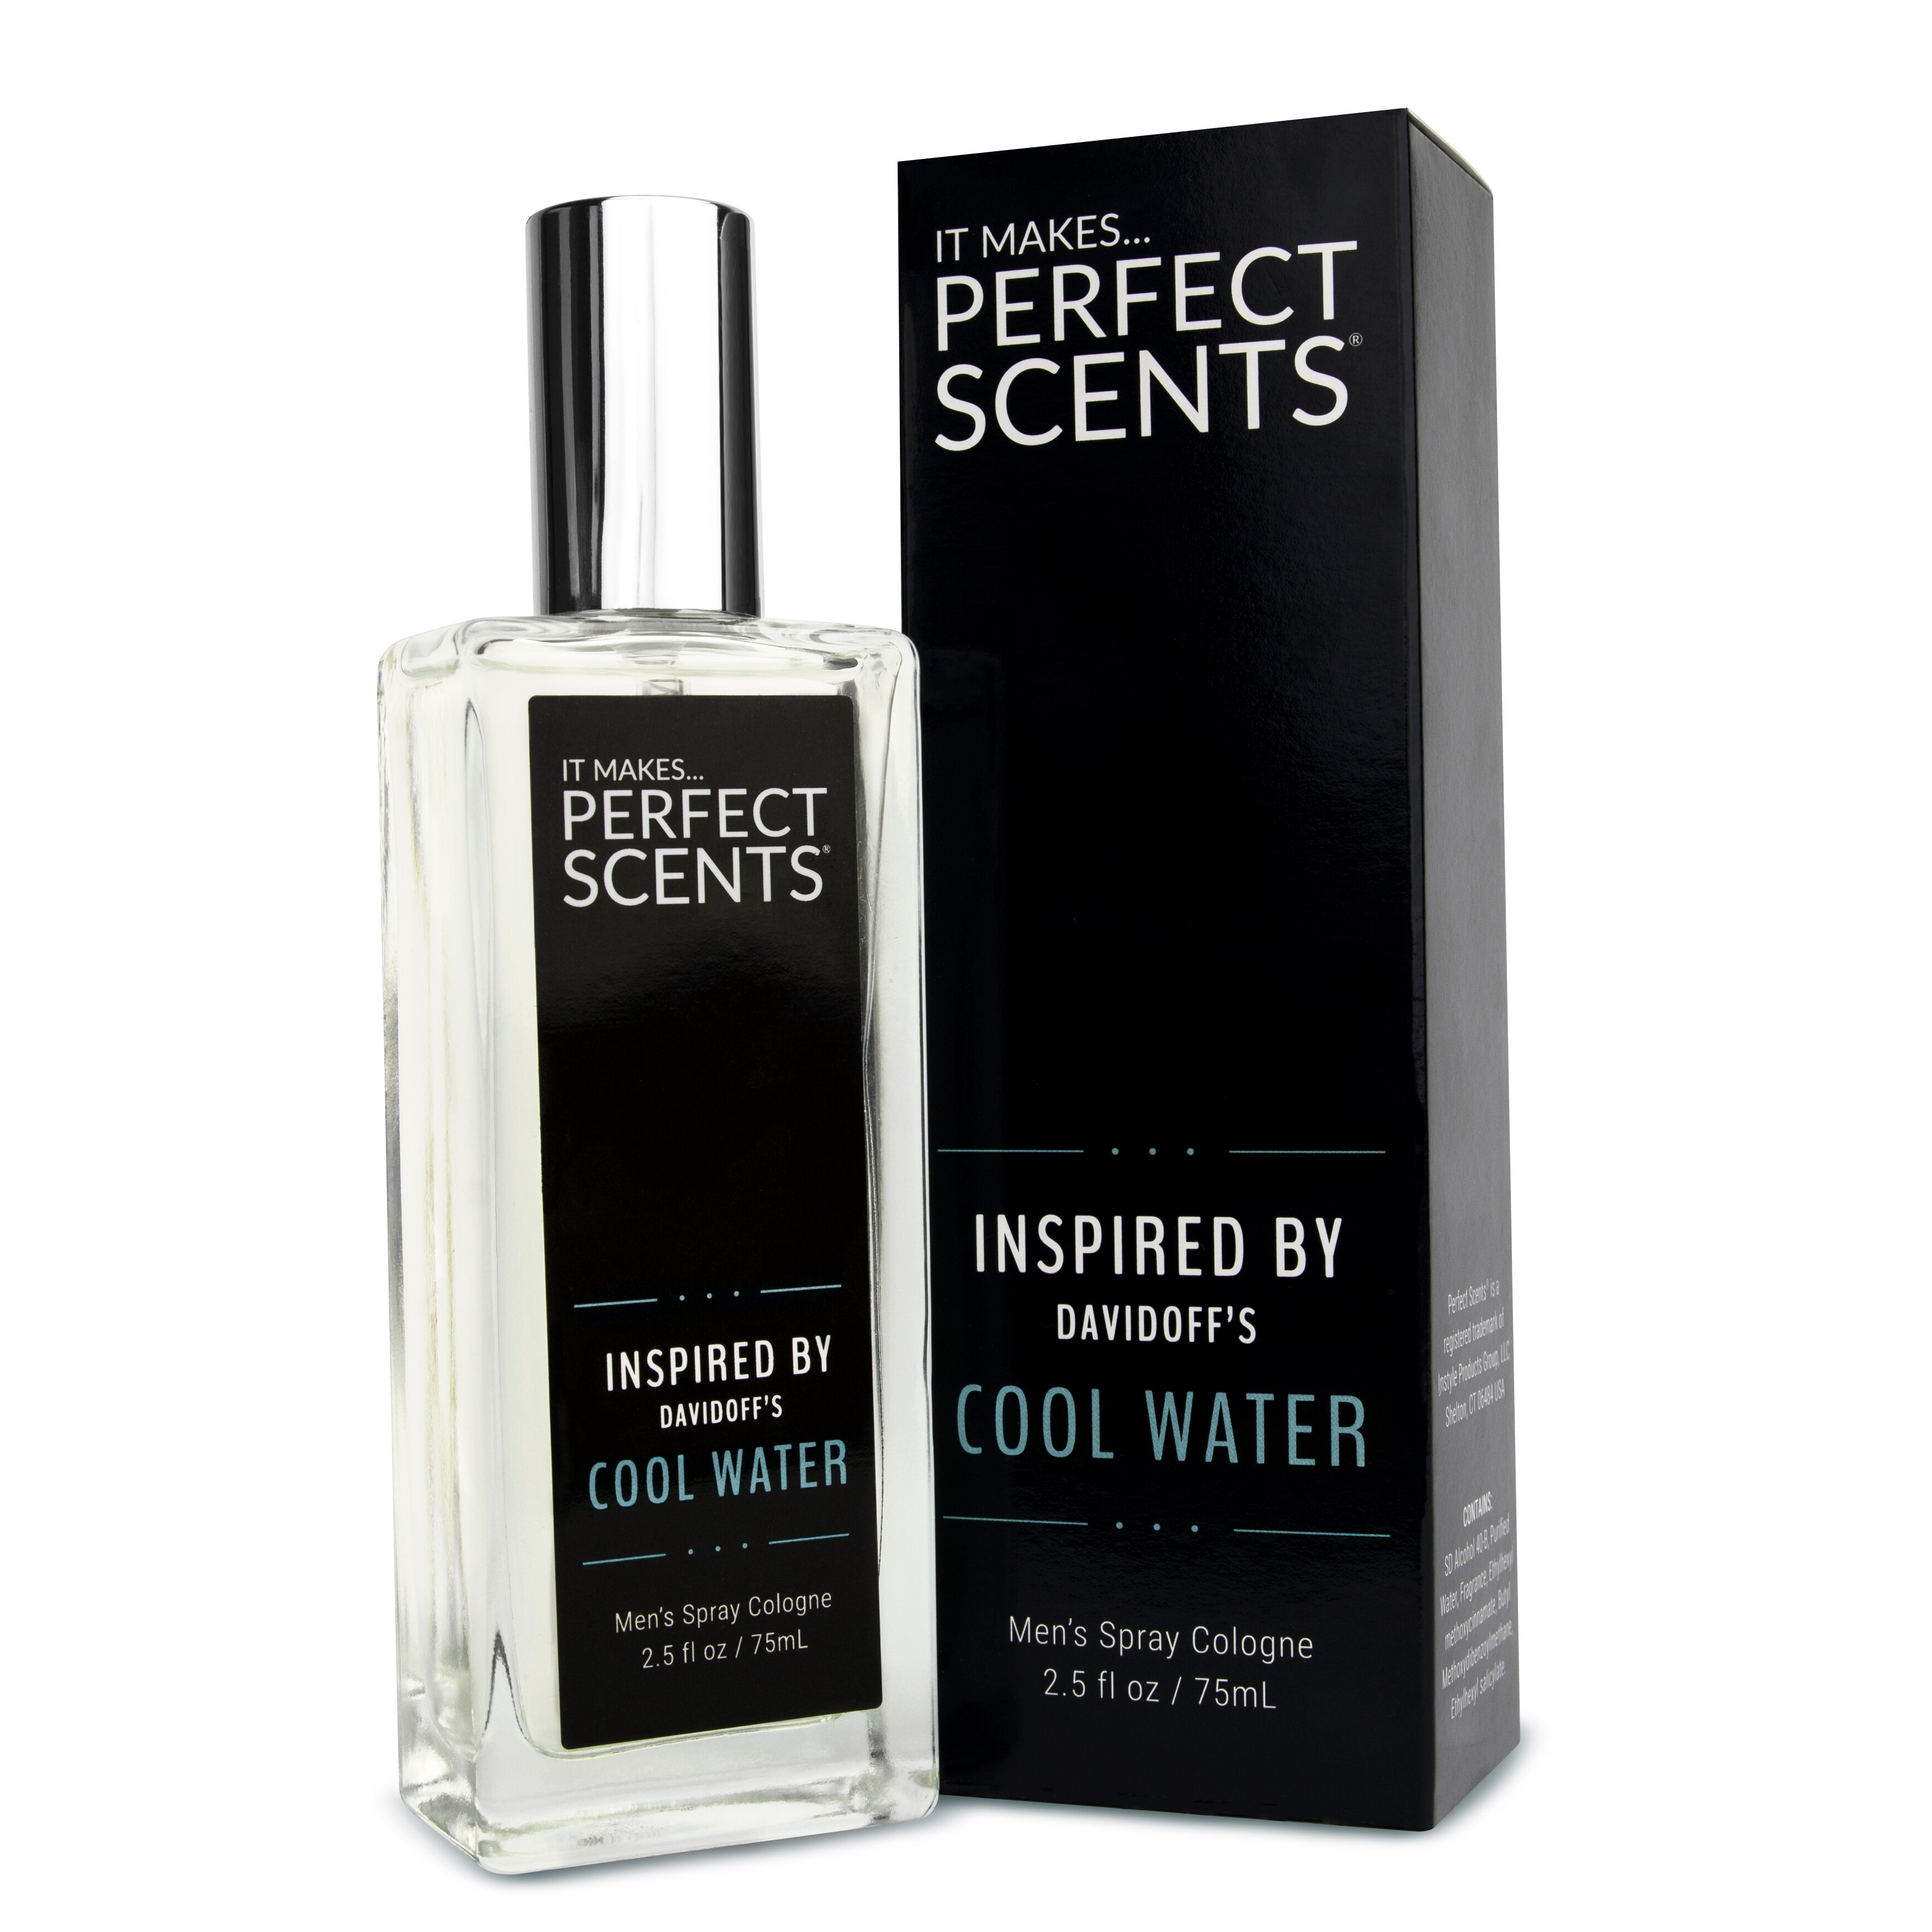 Perfect Scents Fragrances - Colonia en spray para hombres, Impression of Cool Water by Davidoff